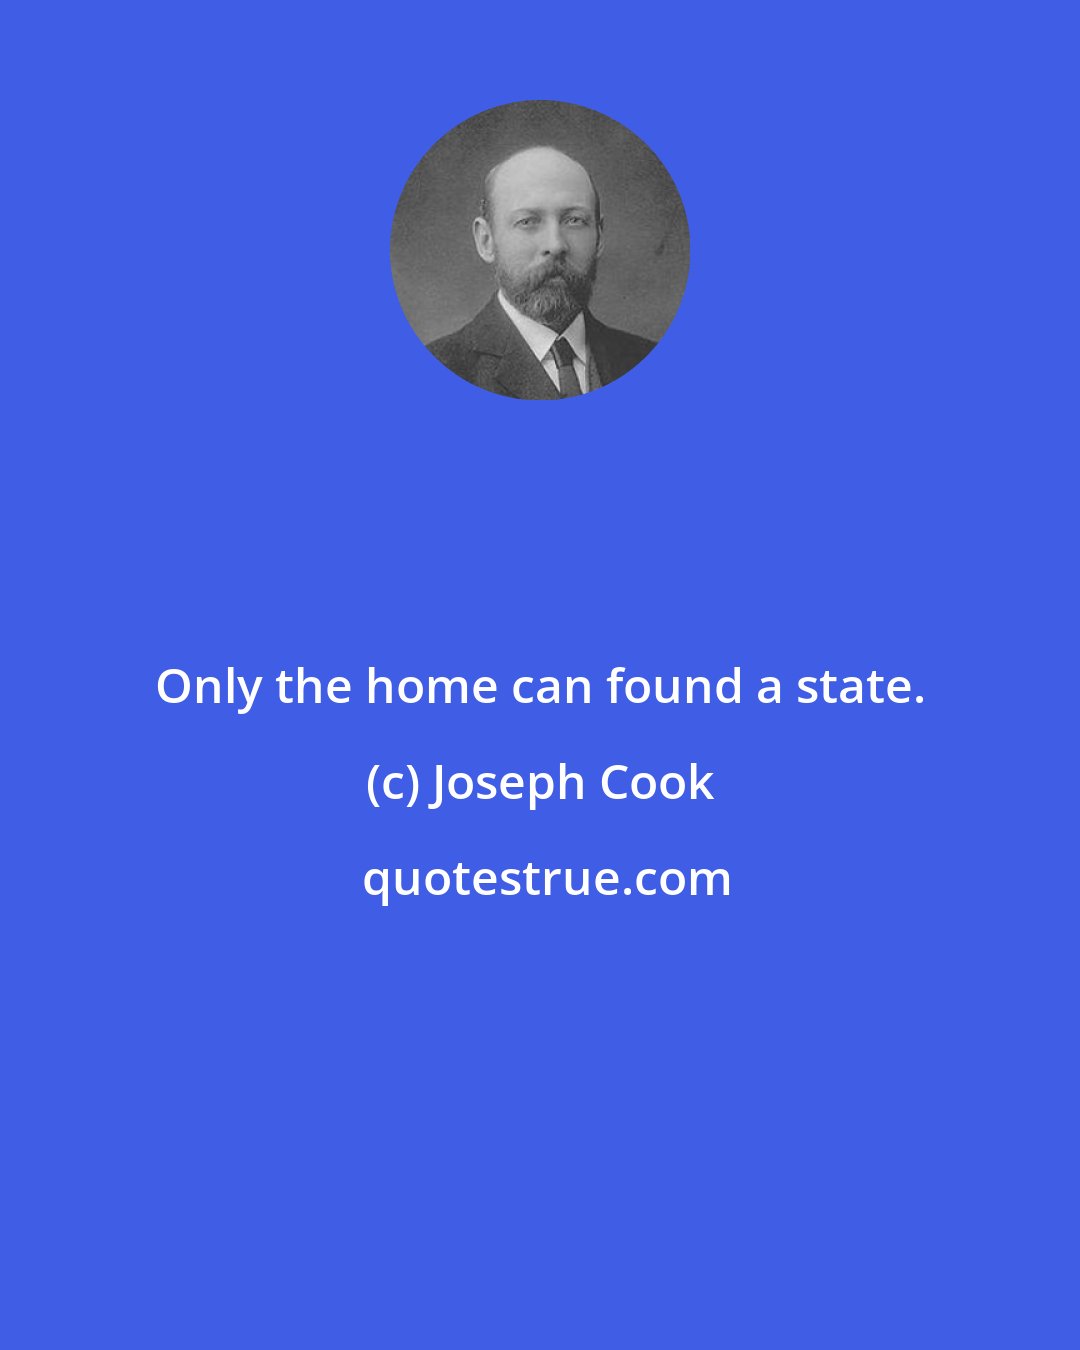 Joseph Cook: Only the home can found a state.